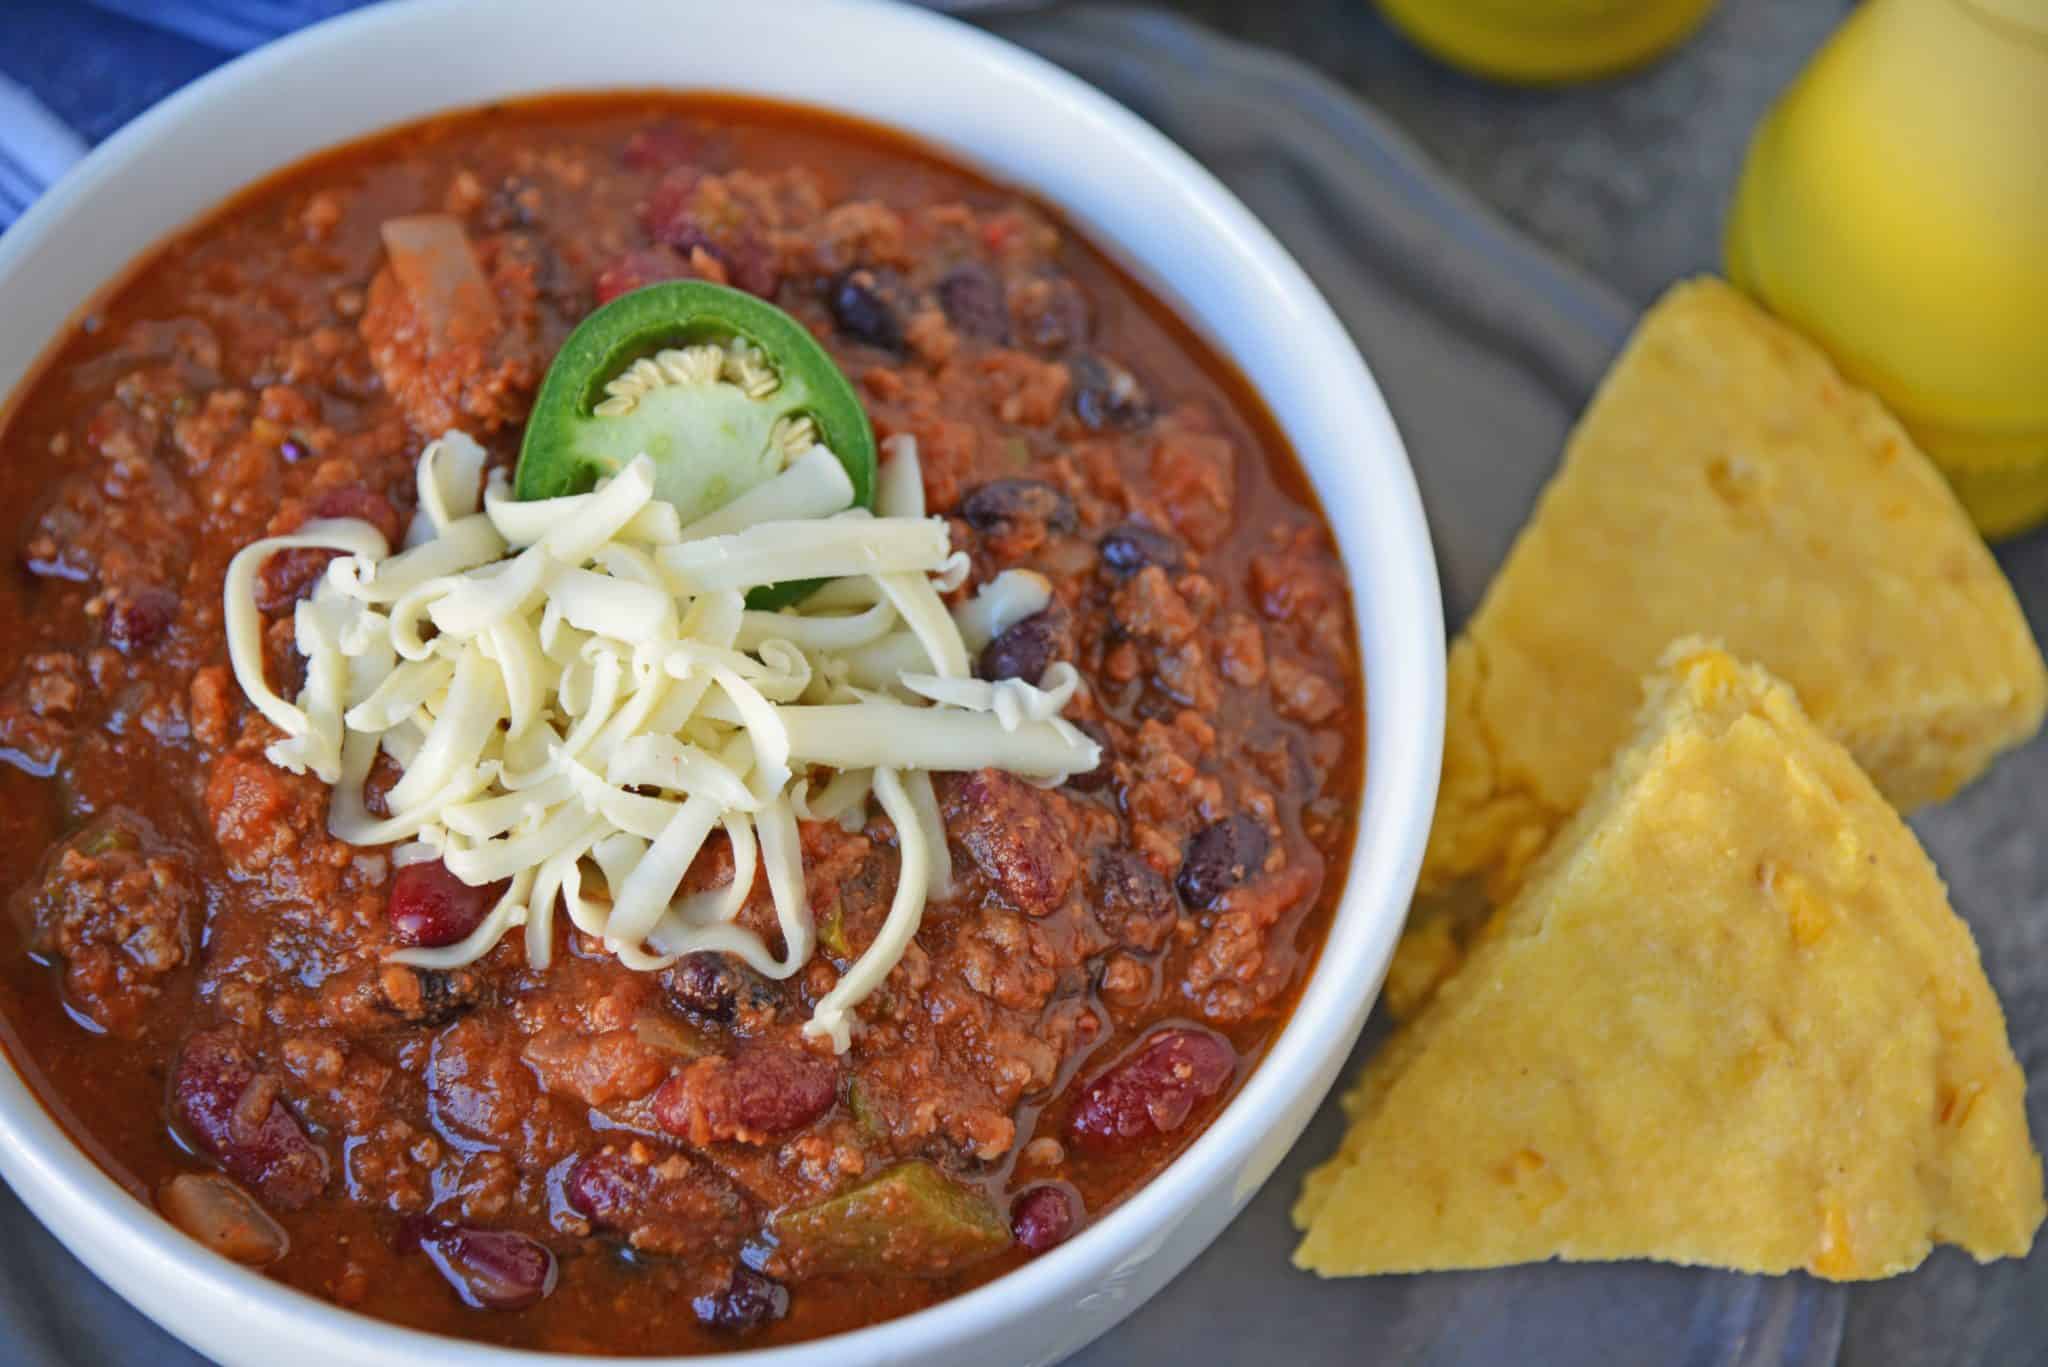 Instant Pot Chili is a gold star chili. A simple chili recipe using jalapeño, chili seasoning, beans and beef ready in just 20 minutes! #instantpotrecipes #intantpotchili #easychilirecipe www.savoryexperiments.com 